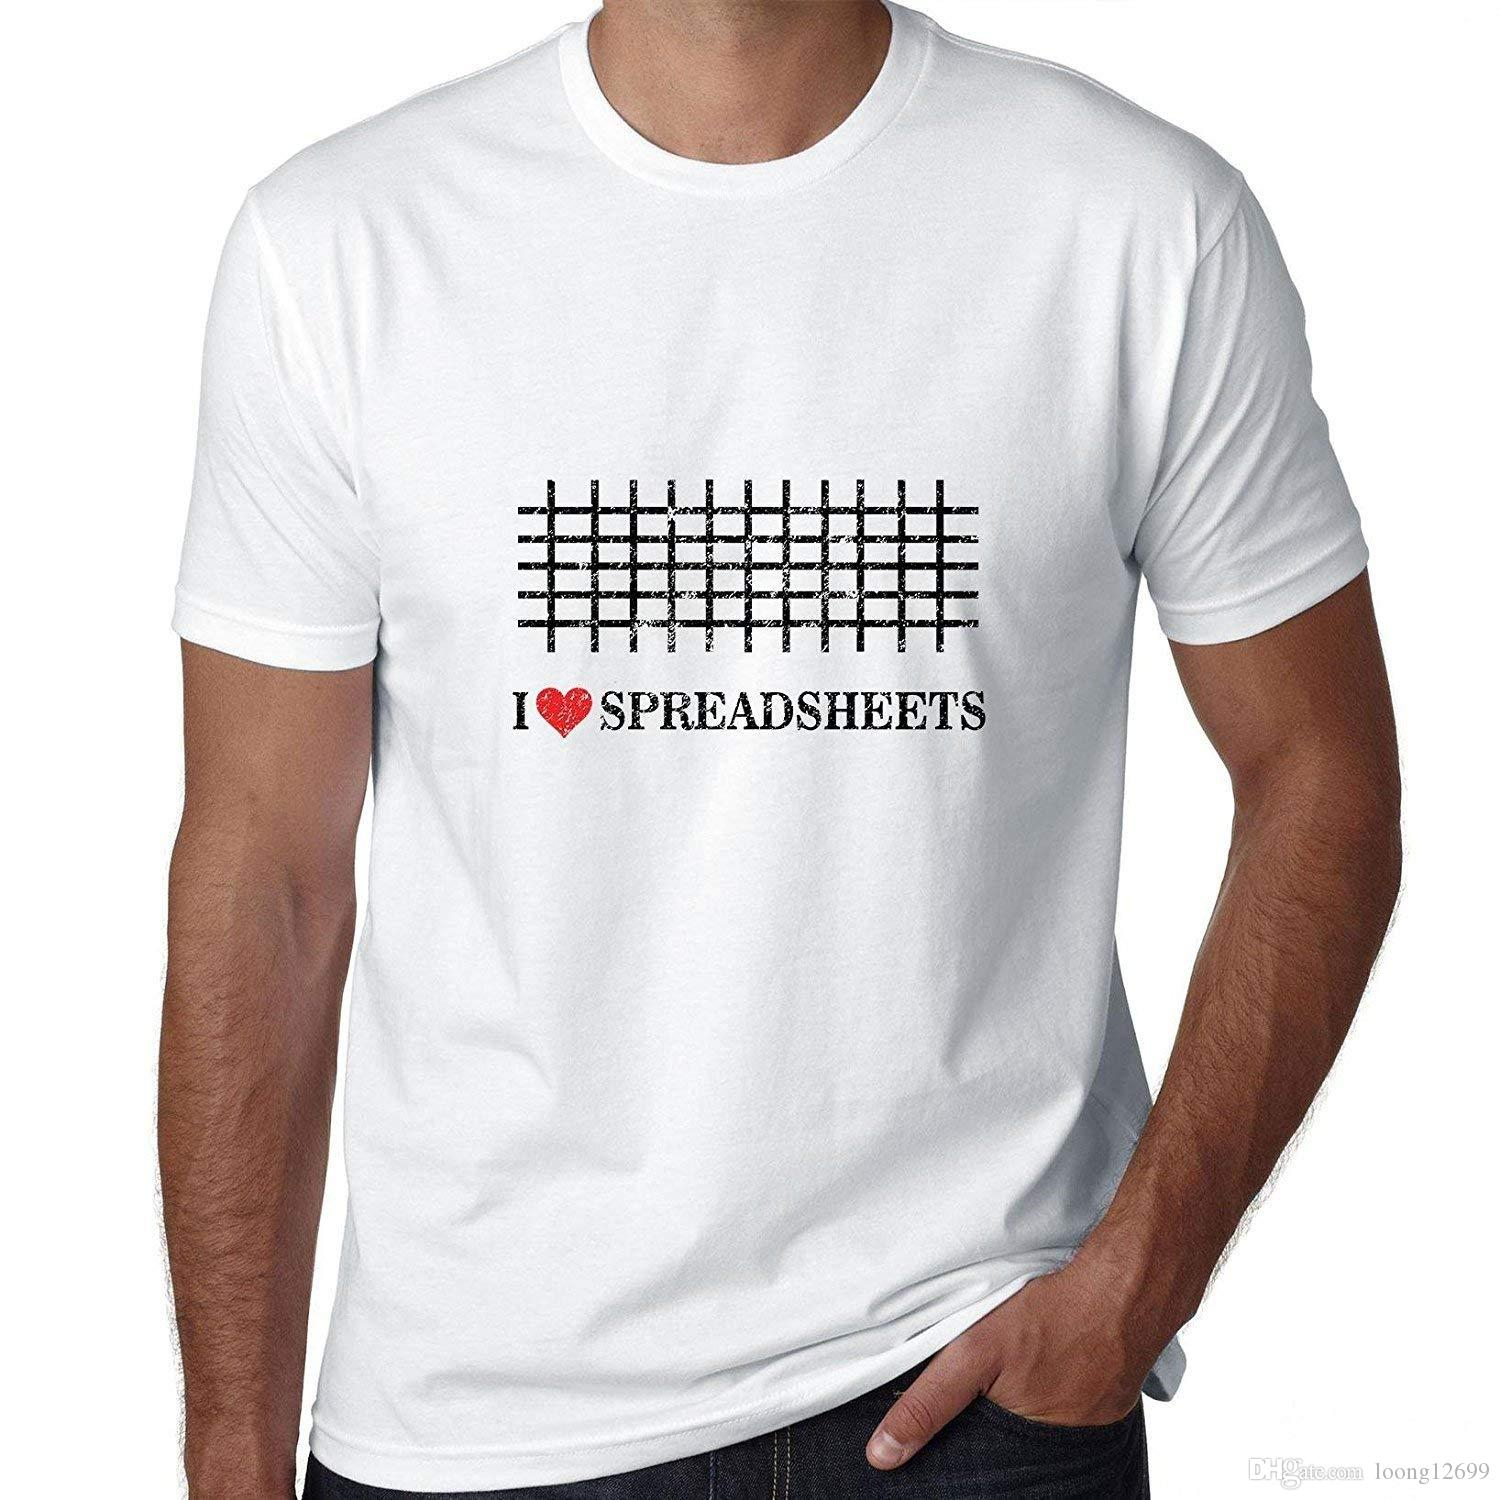 I Love Spreadsheets T Shirt With I Love Spreadsheets With Cool Graphic Men's T Shirt T Shirts Design